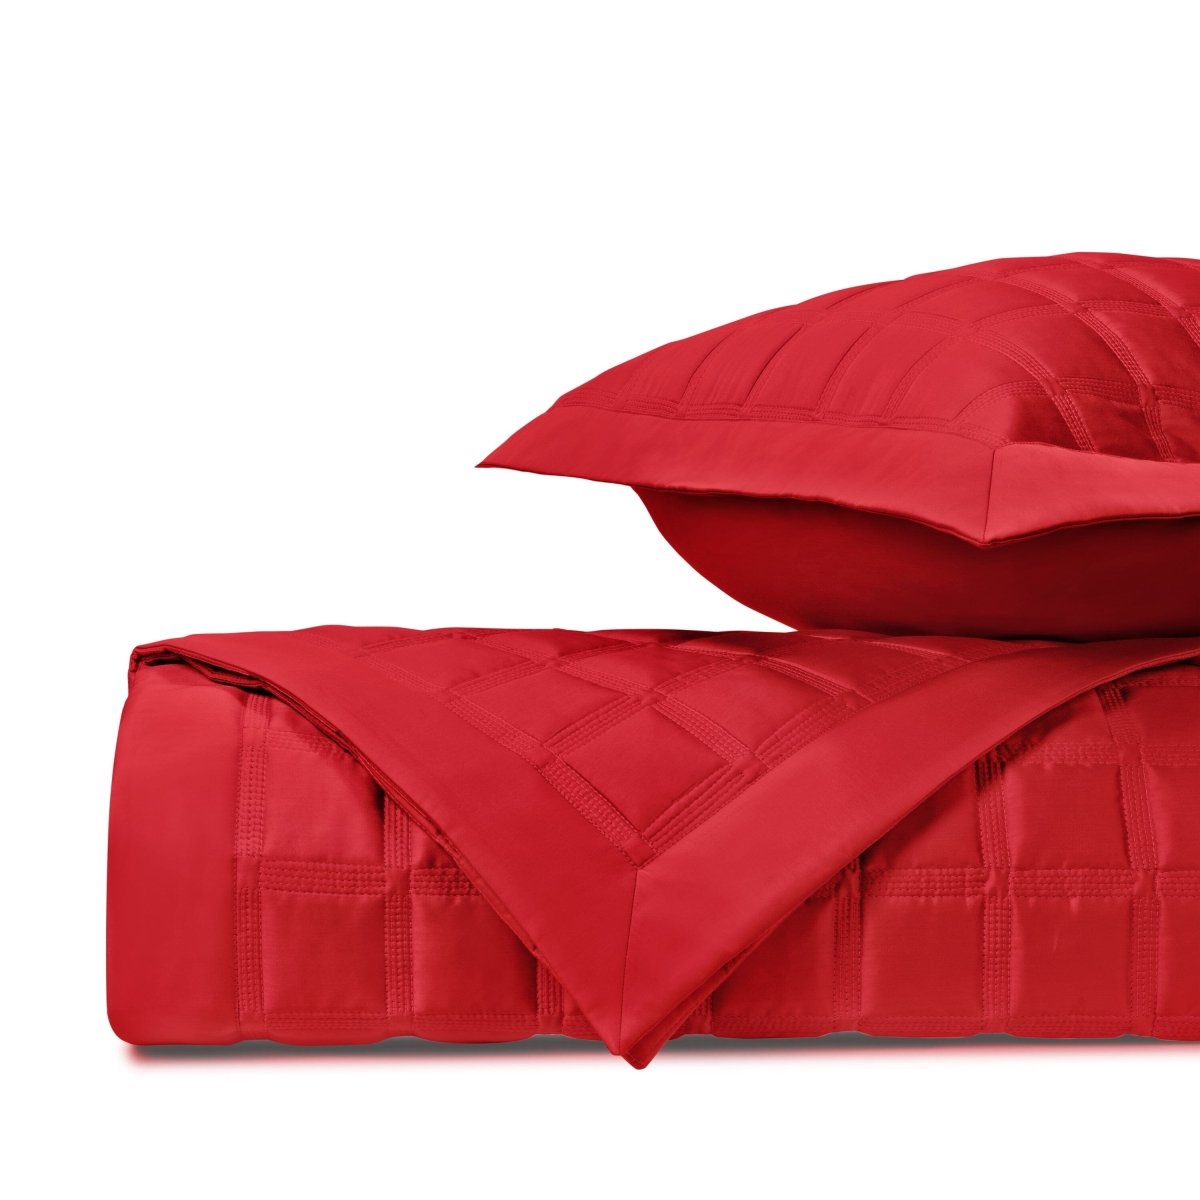 ATHENS Quilted Coverlet in Bright Red by Home Treasures at Fig Linens and Home